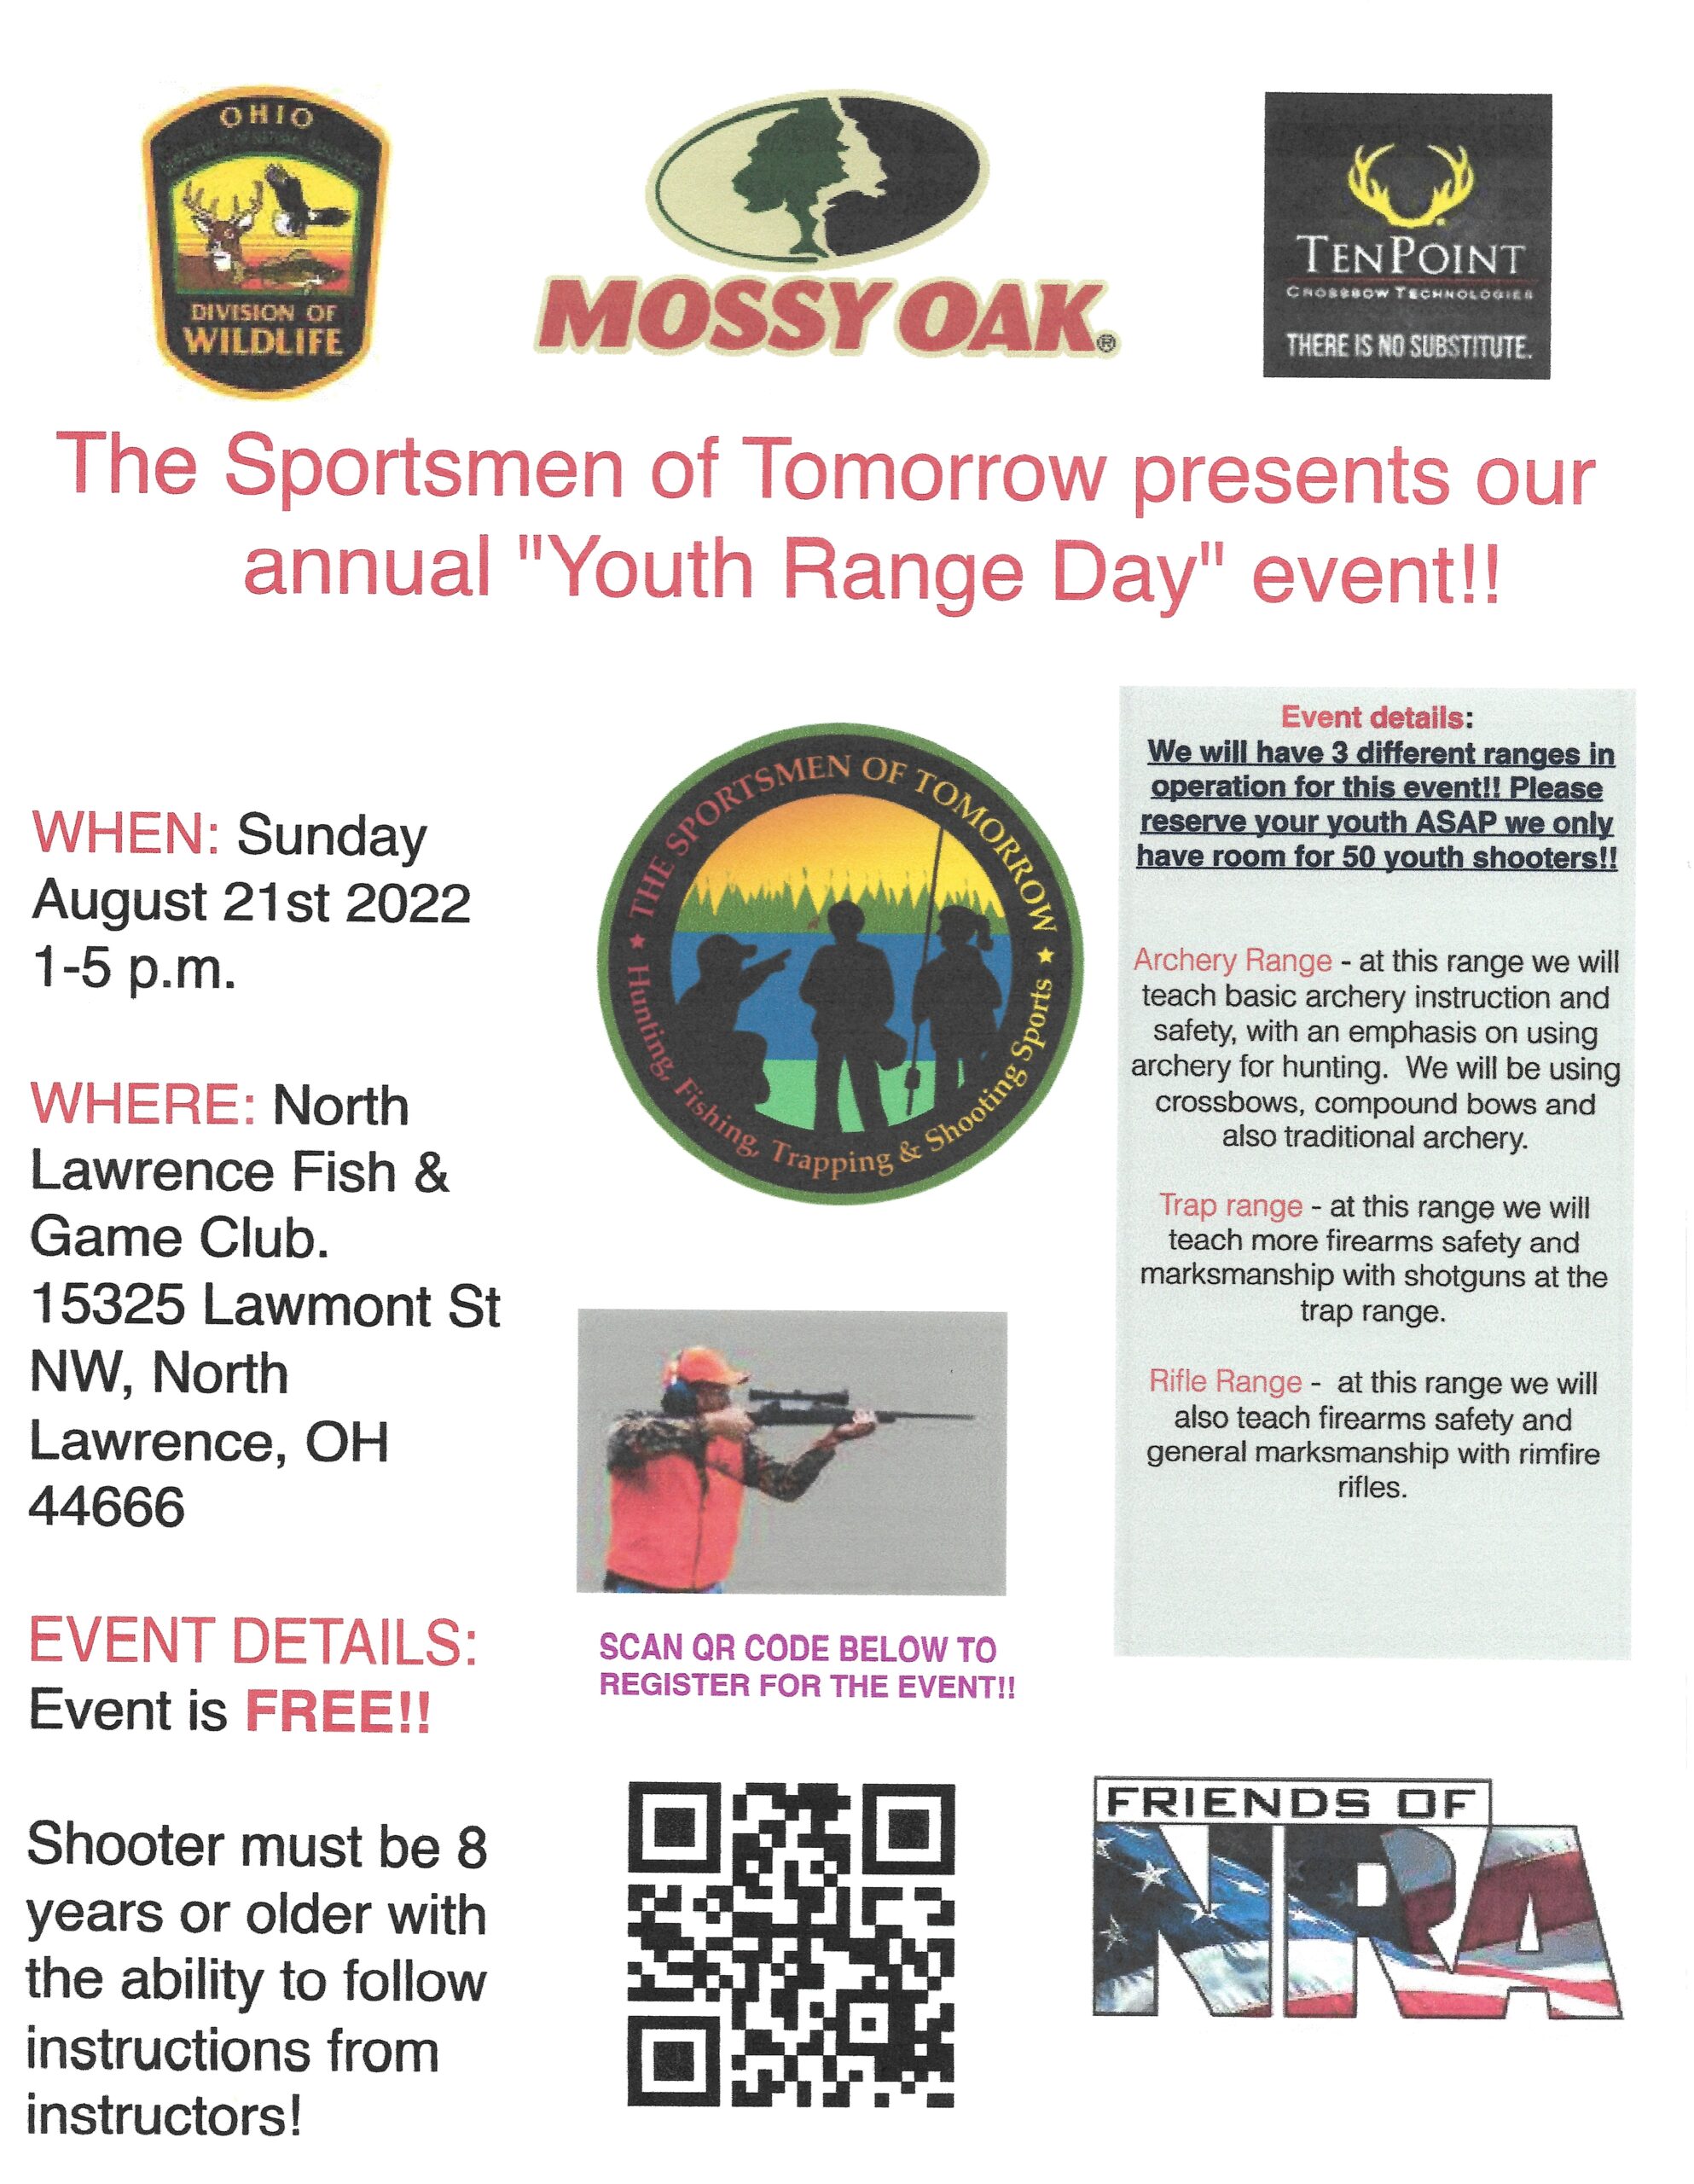 Sportsmen of Tomorrow Youth Range Day Event